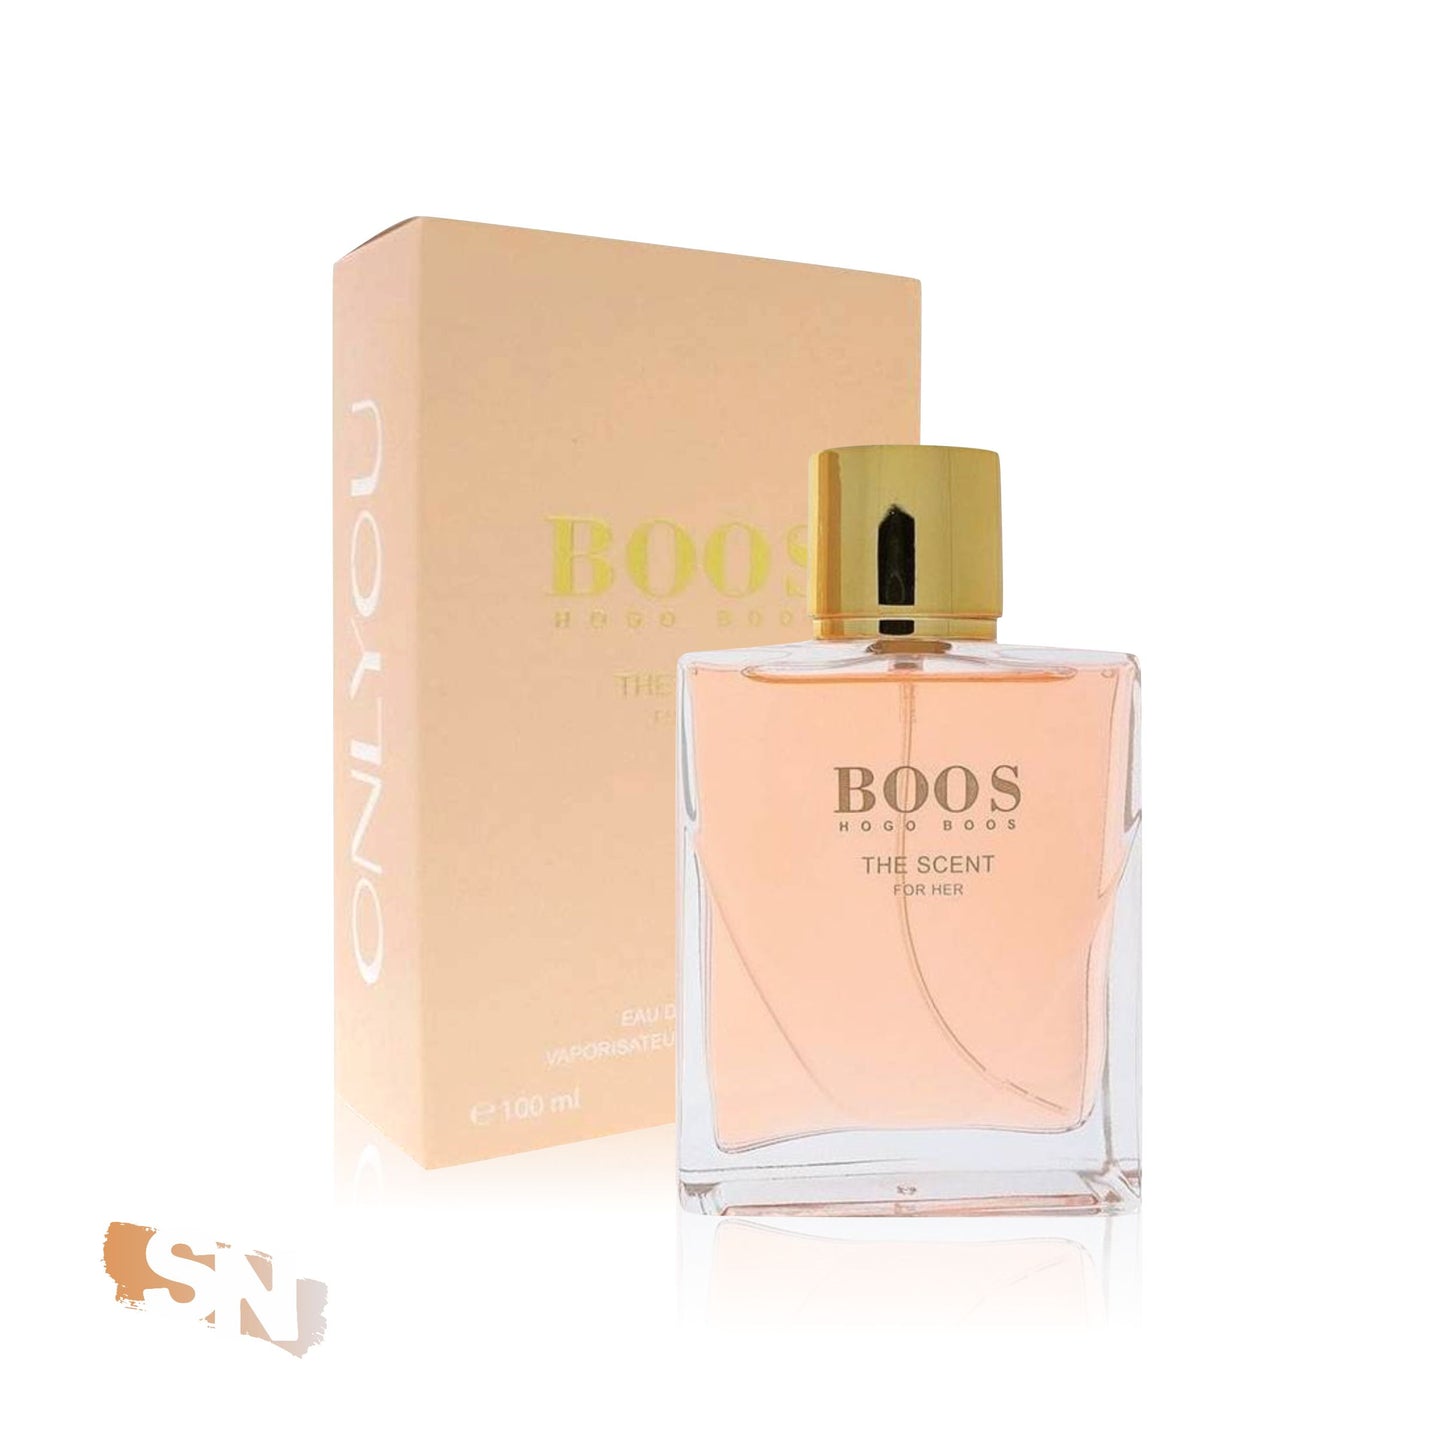 Hogo Boos The Scent | 100ml